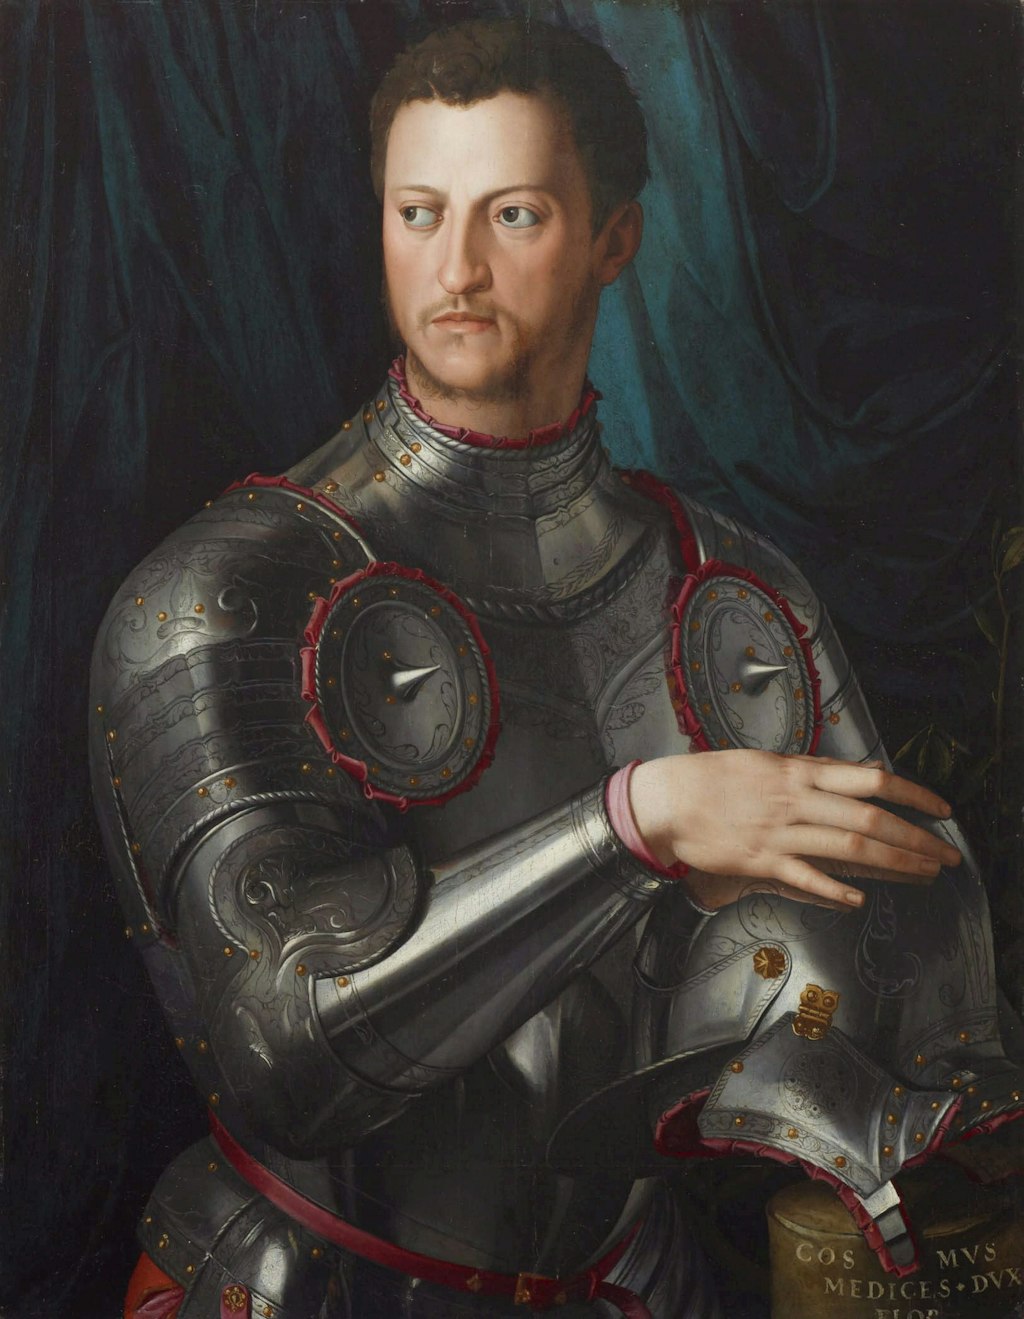 A portrait painting of a person with short brown hair and light skin wearing a suit of armour.